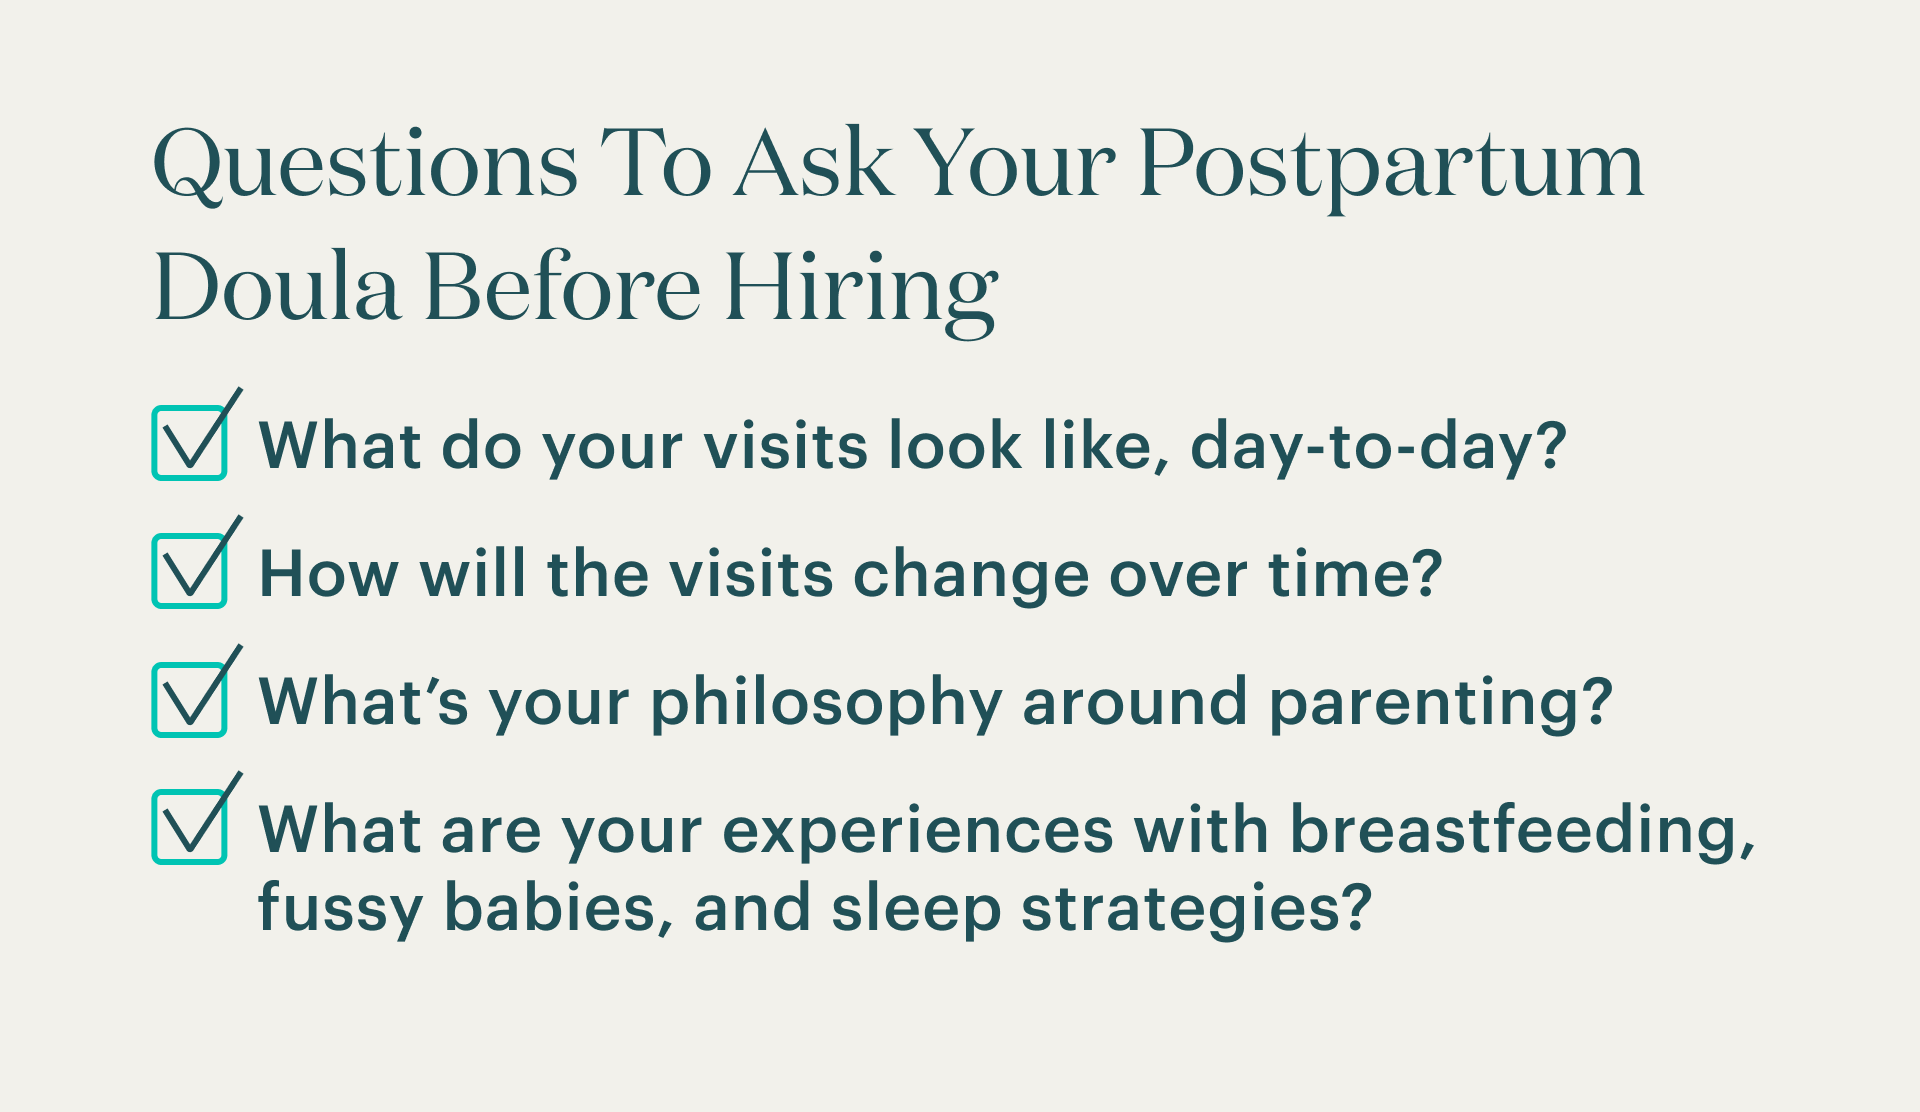 A checklist of questions to ask your postpartum doula before hiring 